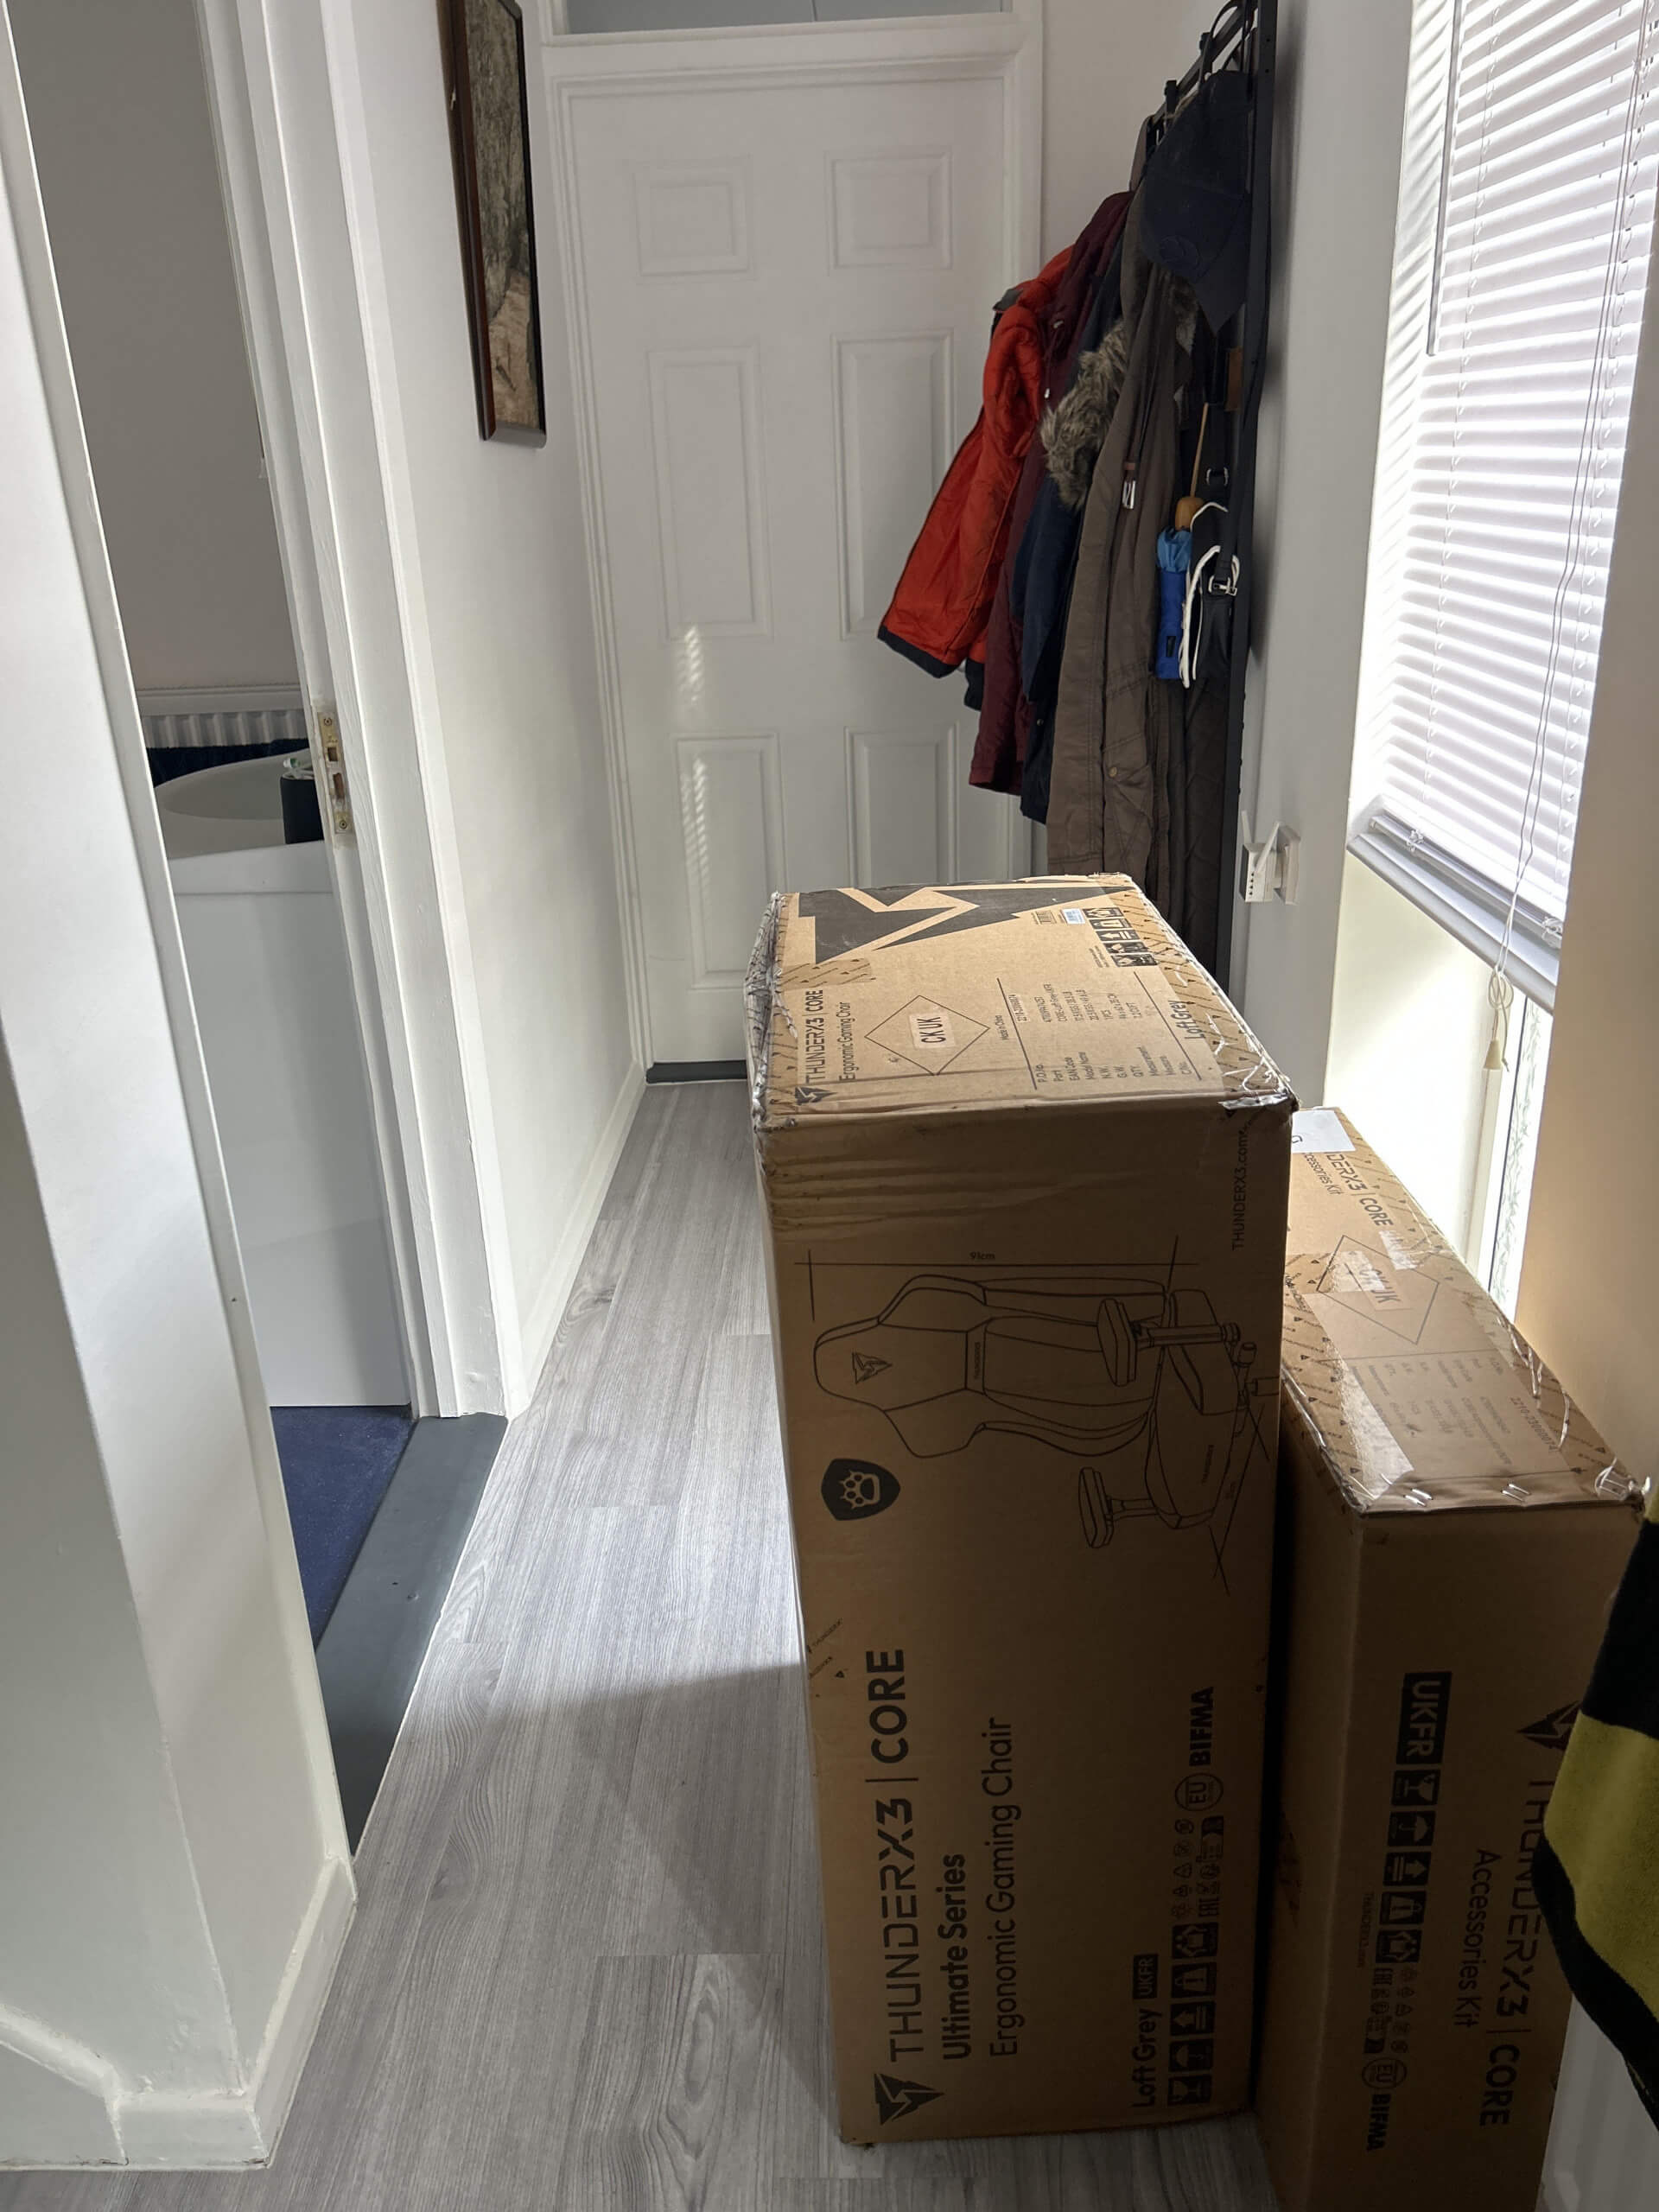 This photograph shows two carboard boxes in a hallway. These boxes have the gaming chair components inside. 